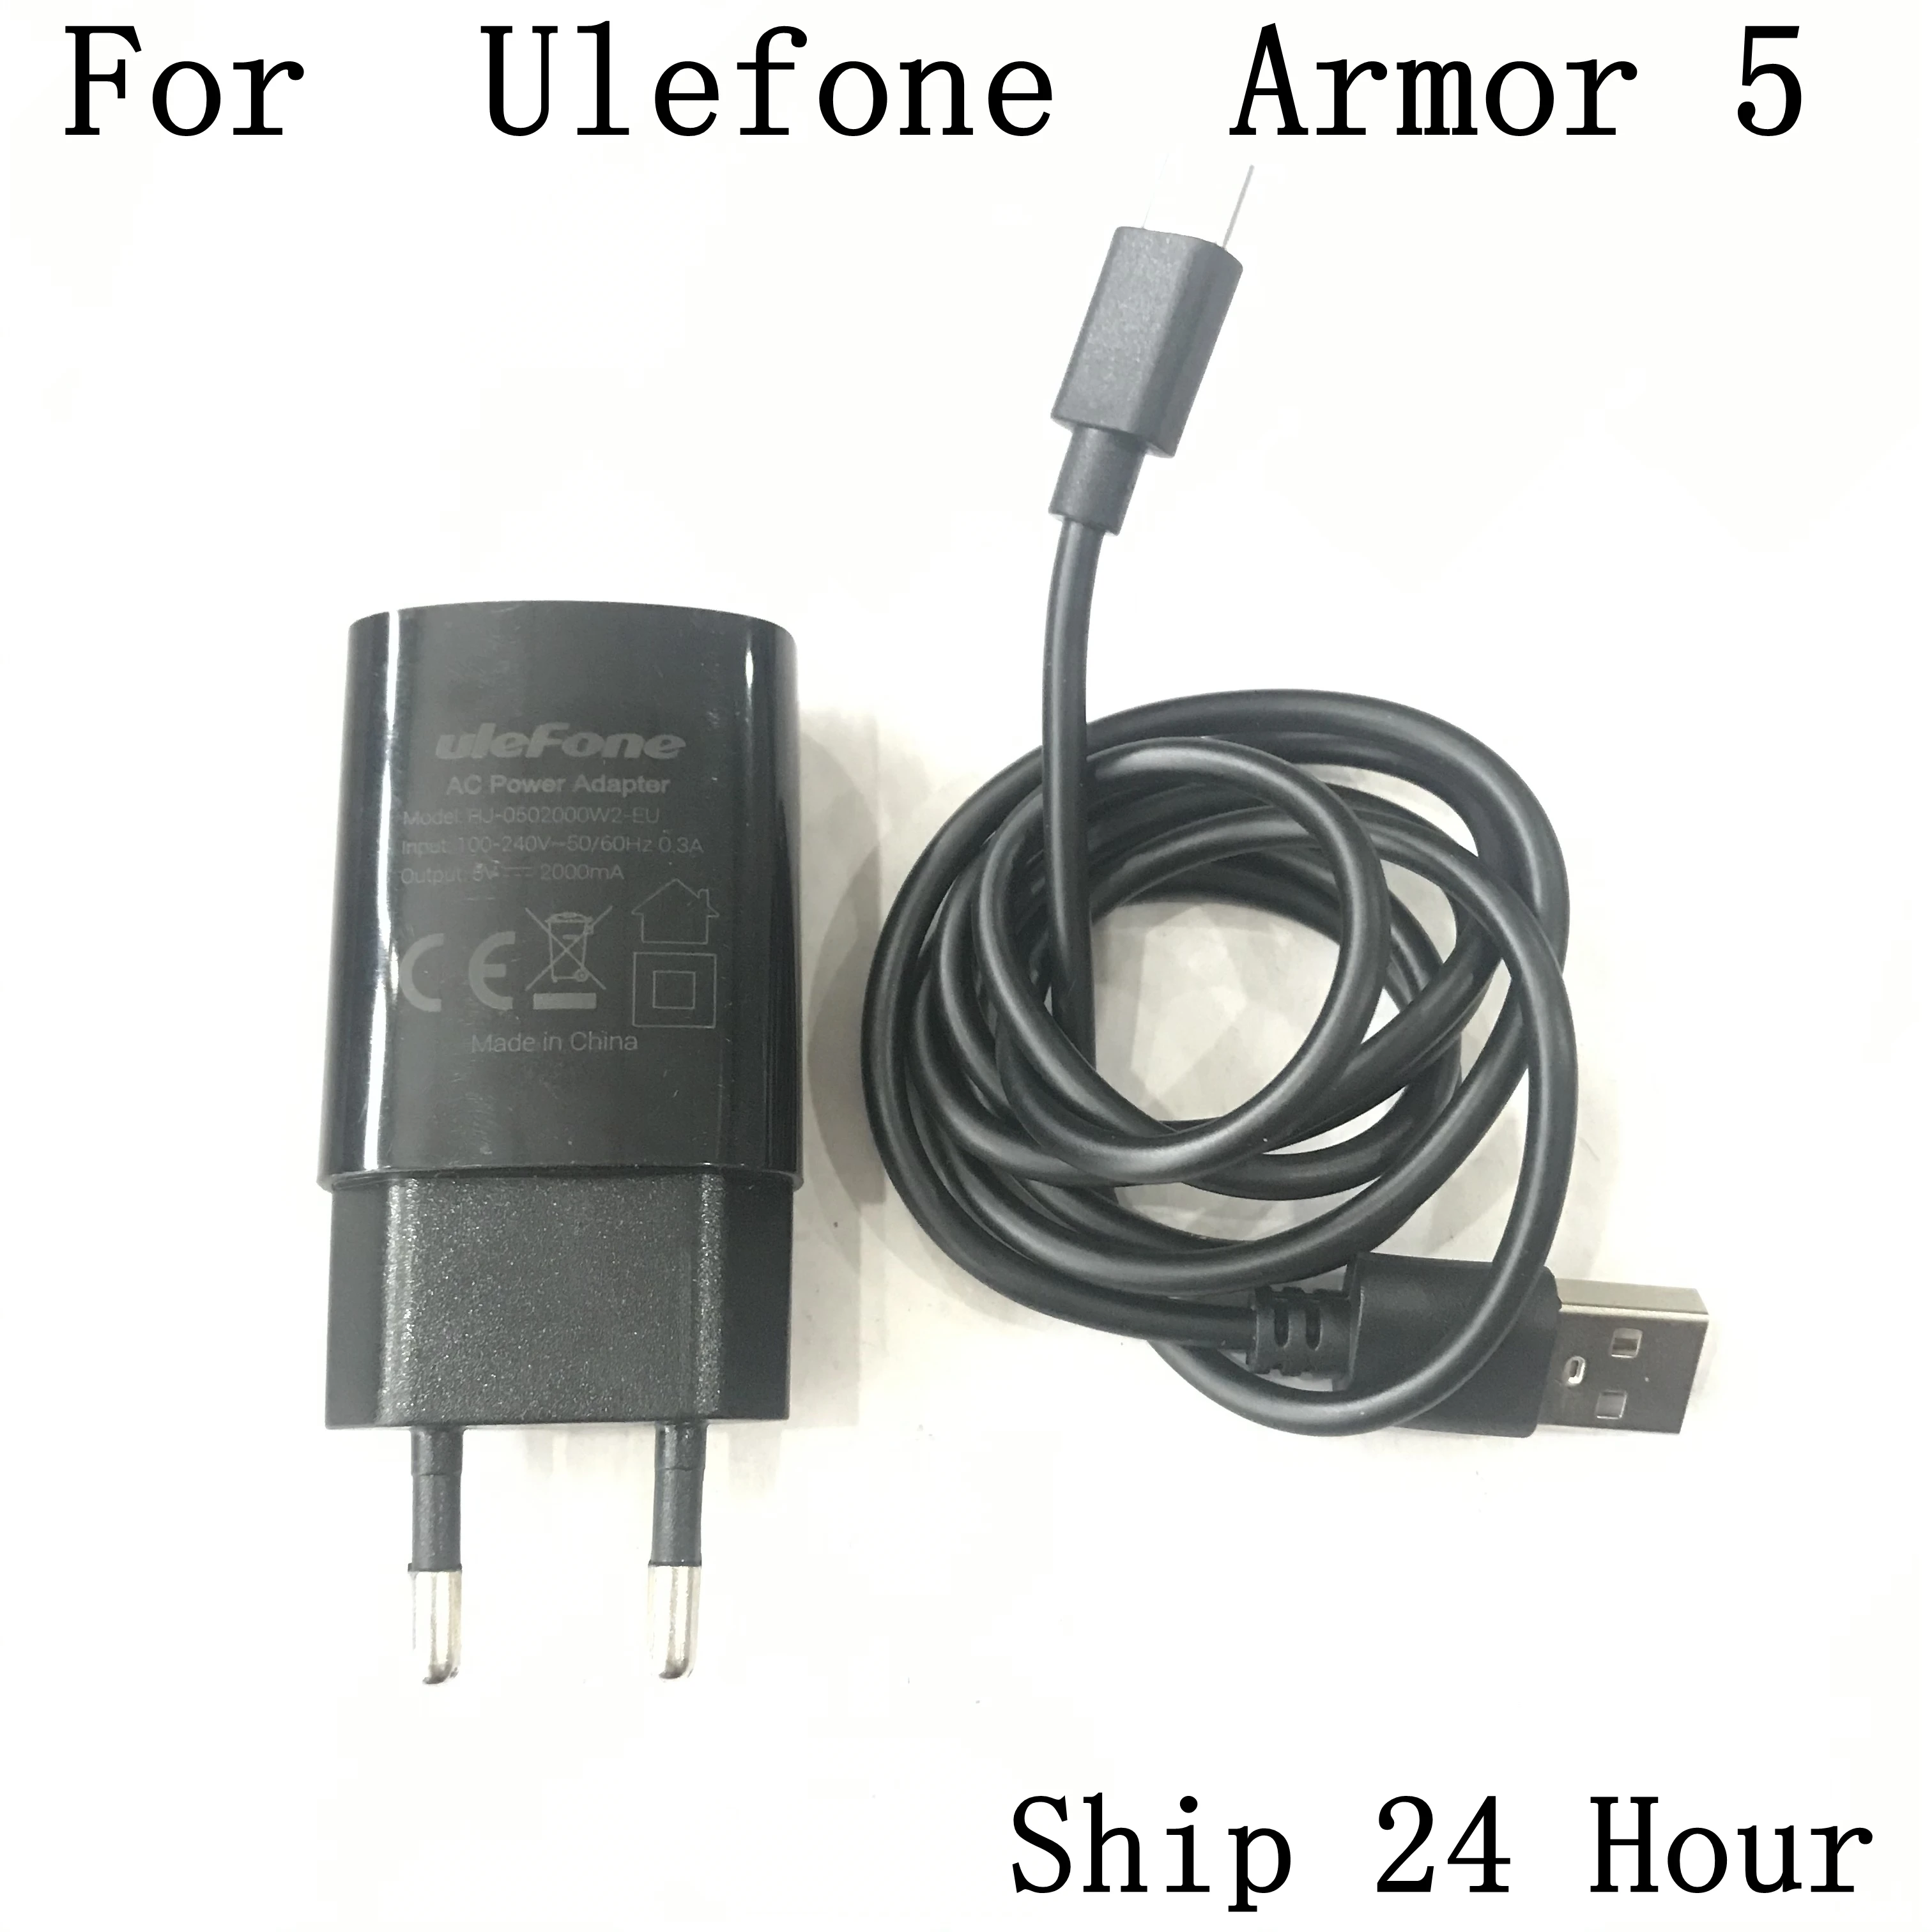 

Ulefone Armor 5 Travel Charger + USB Cable USB Line For Ulefone Armor 5 Repair Fixing Part Replacement